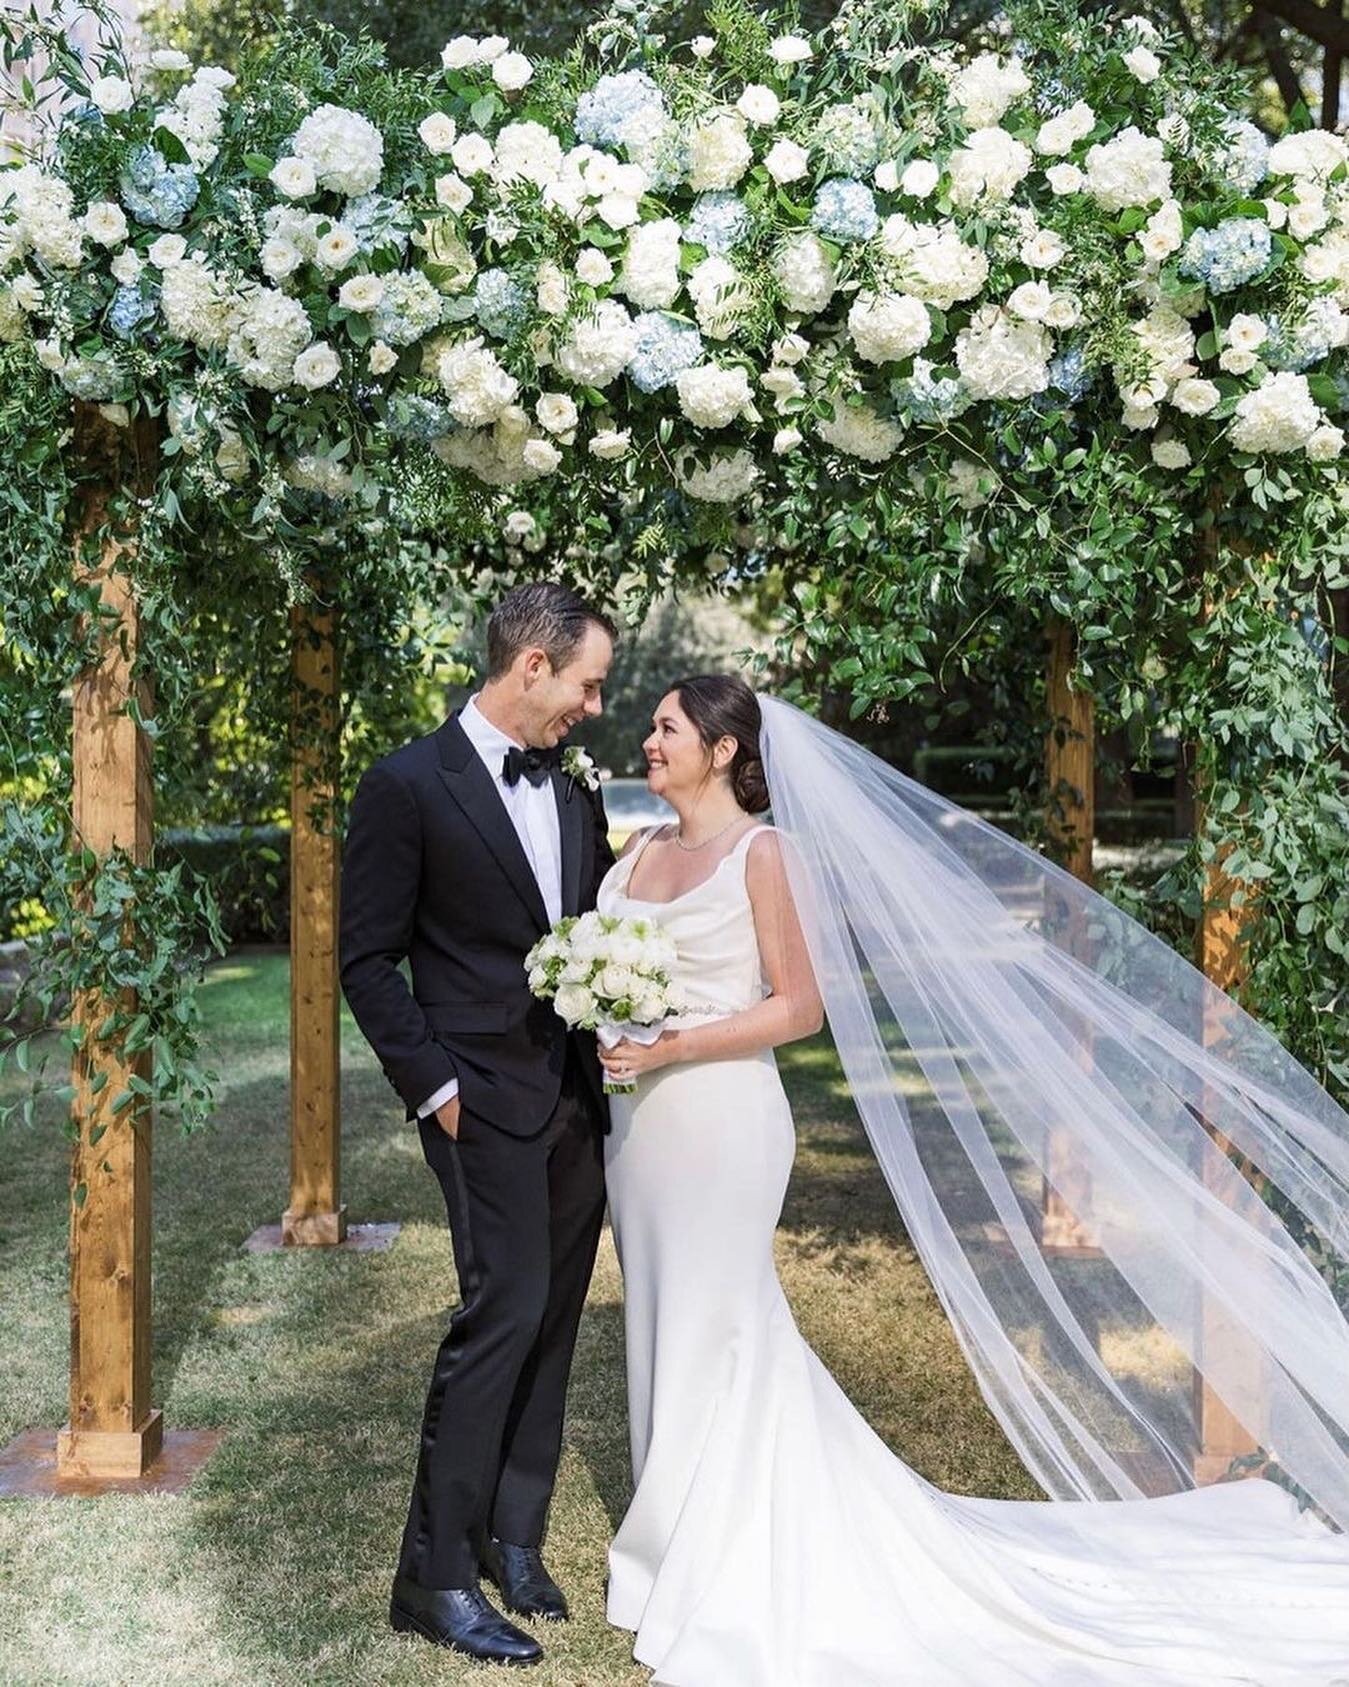 Ready to make memories to last a lifetime? Let's chat about how we can make that happen. Link in bio to connect with our team to start planning today! PC: @neimanmarcusbridal